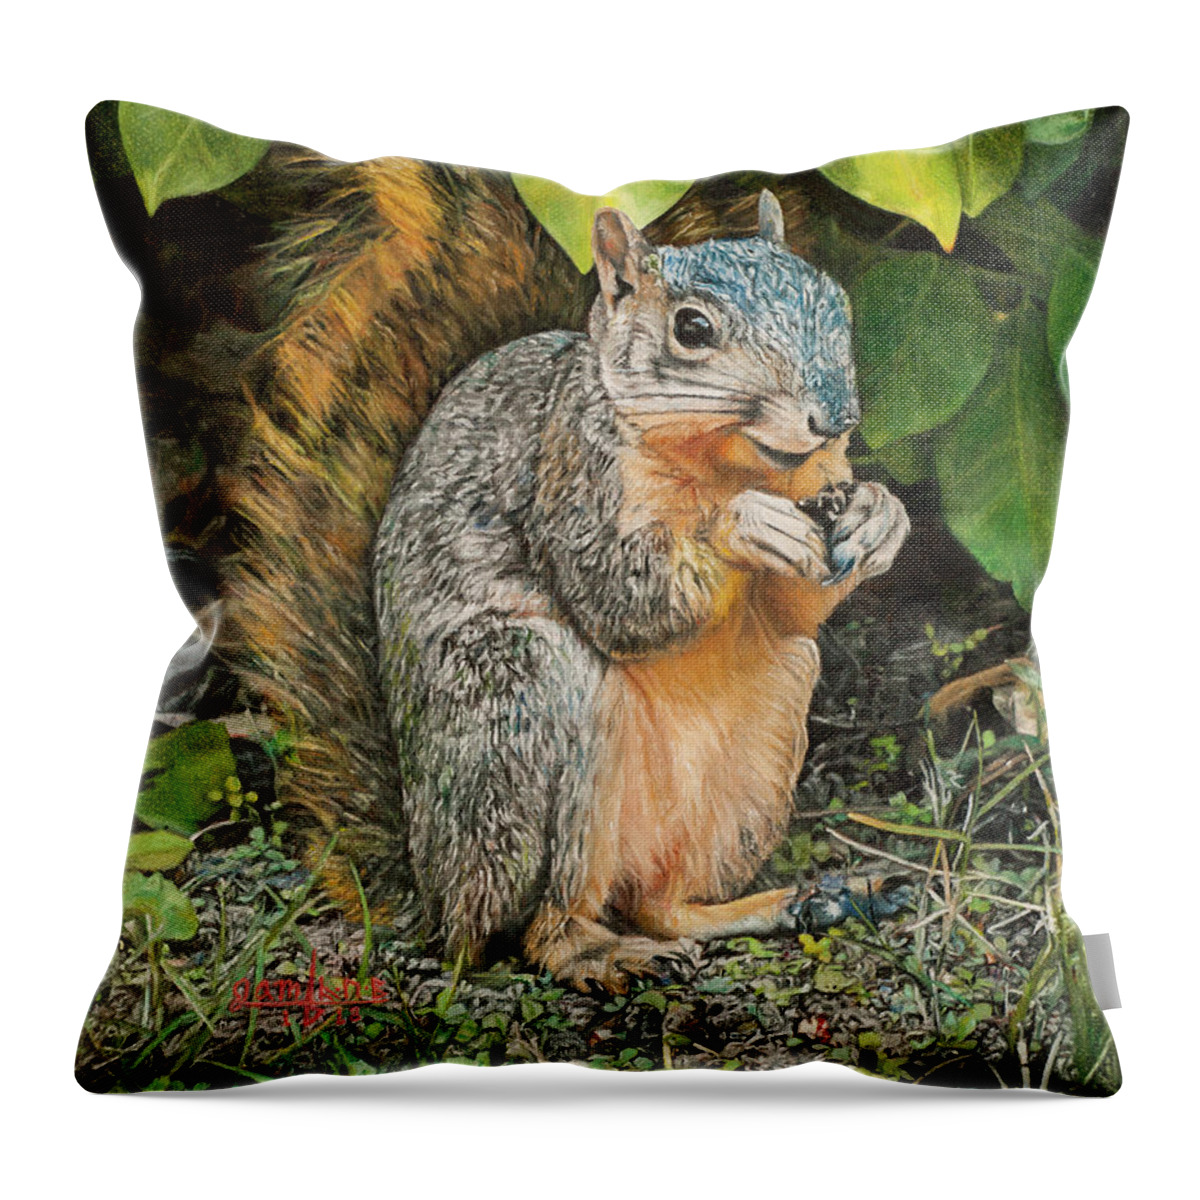 Squirrel Throw Pillow featuring the painting Squirrel Under Bush by Joshua Martin